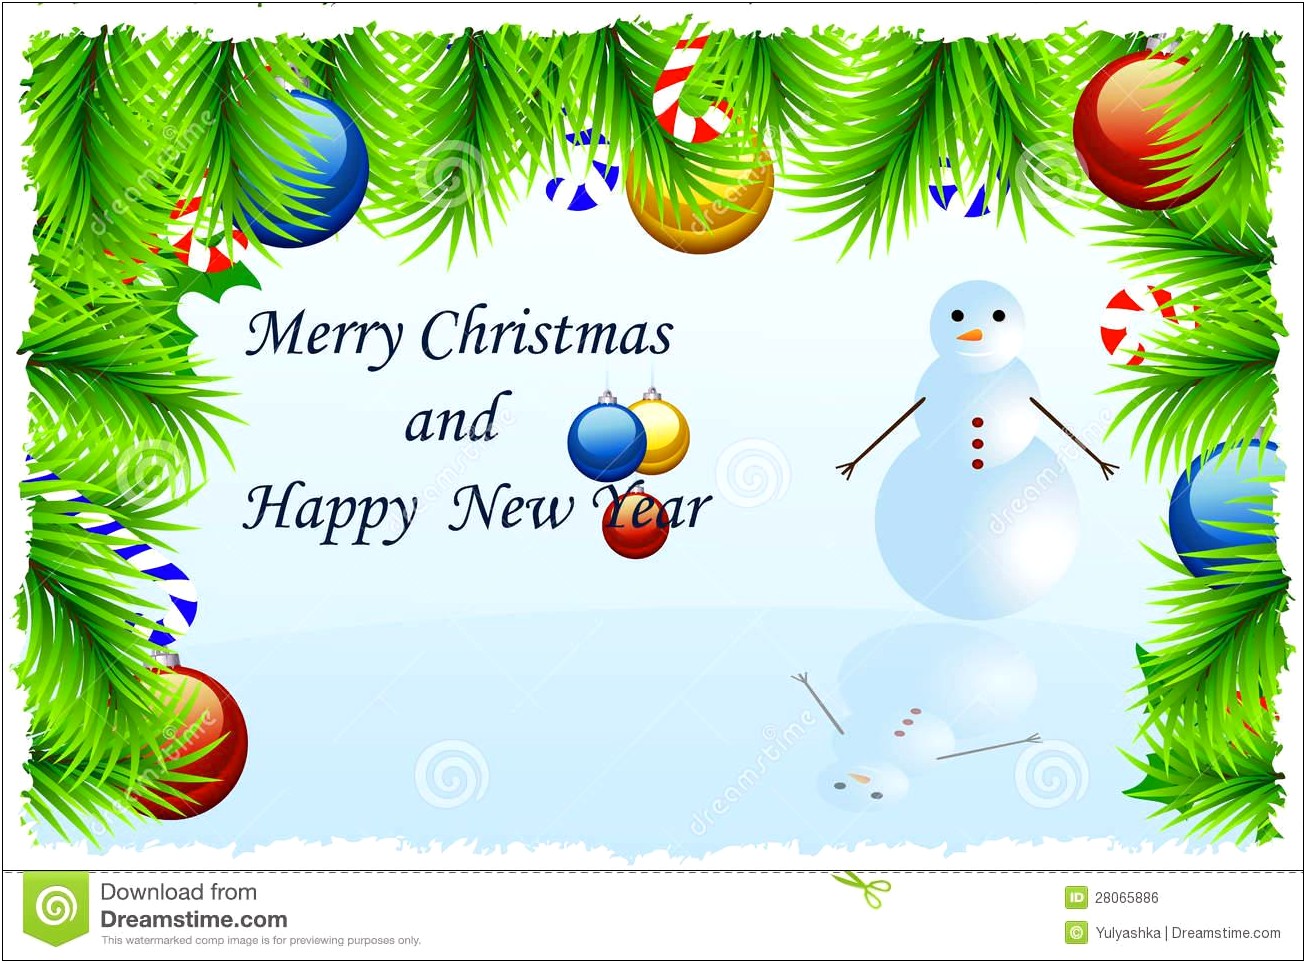 Free Christmas Photo Cards Templates Free Downloads